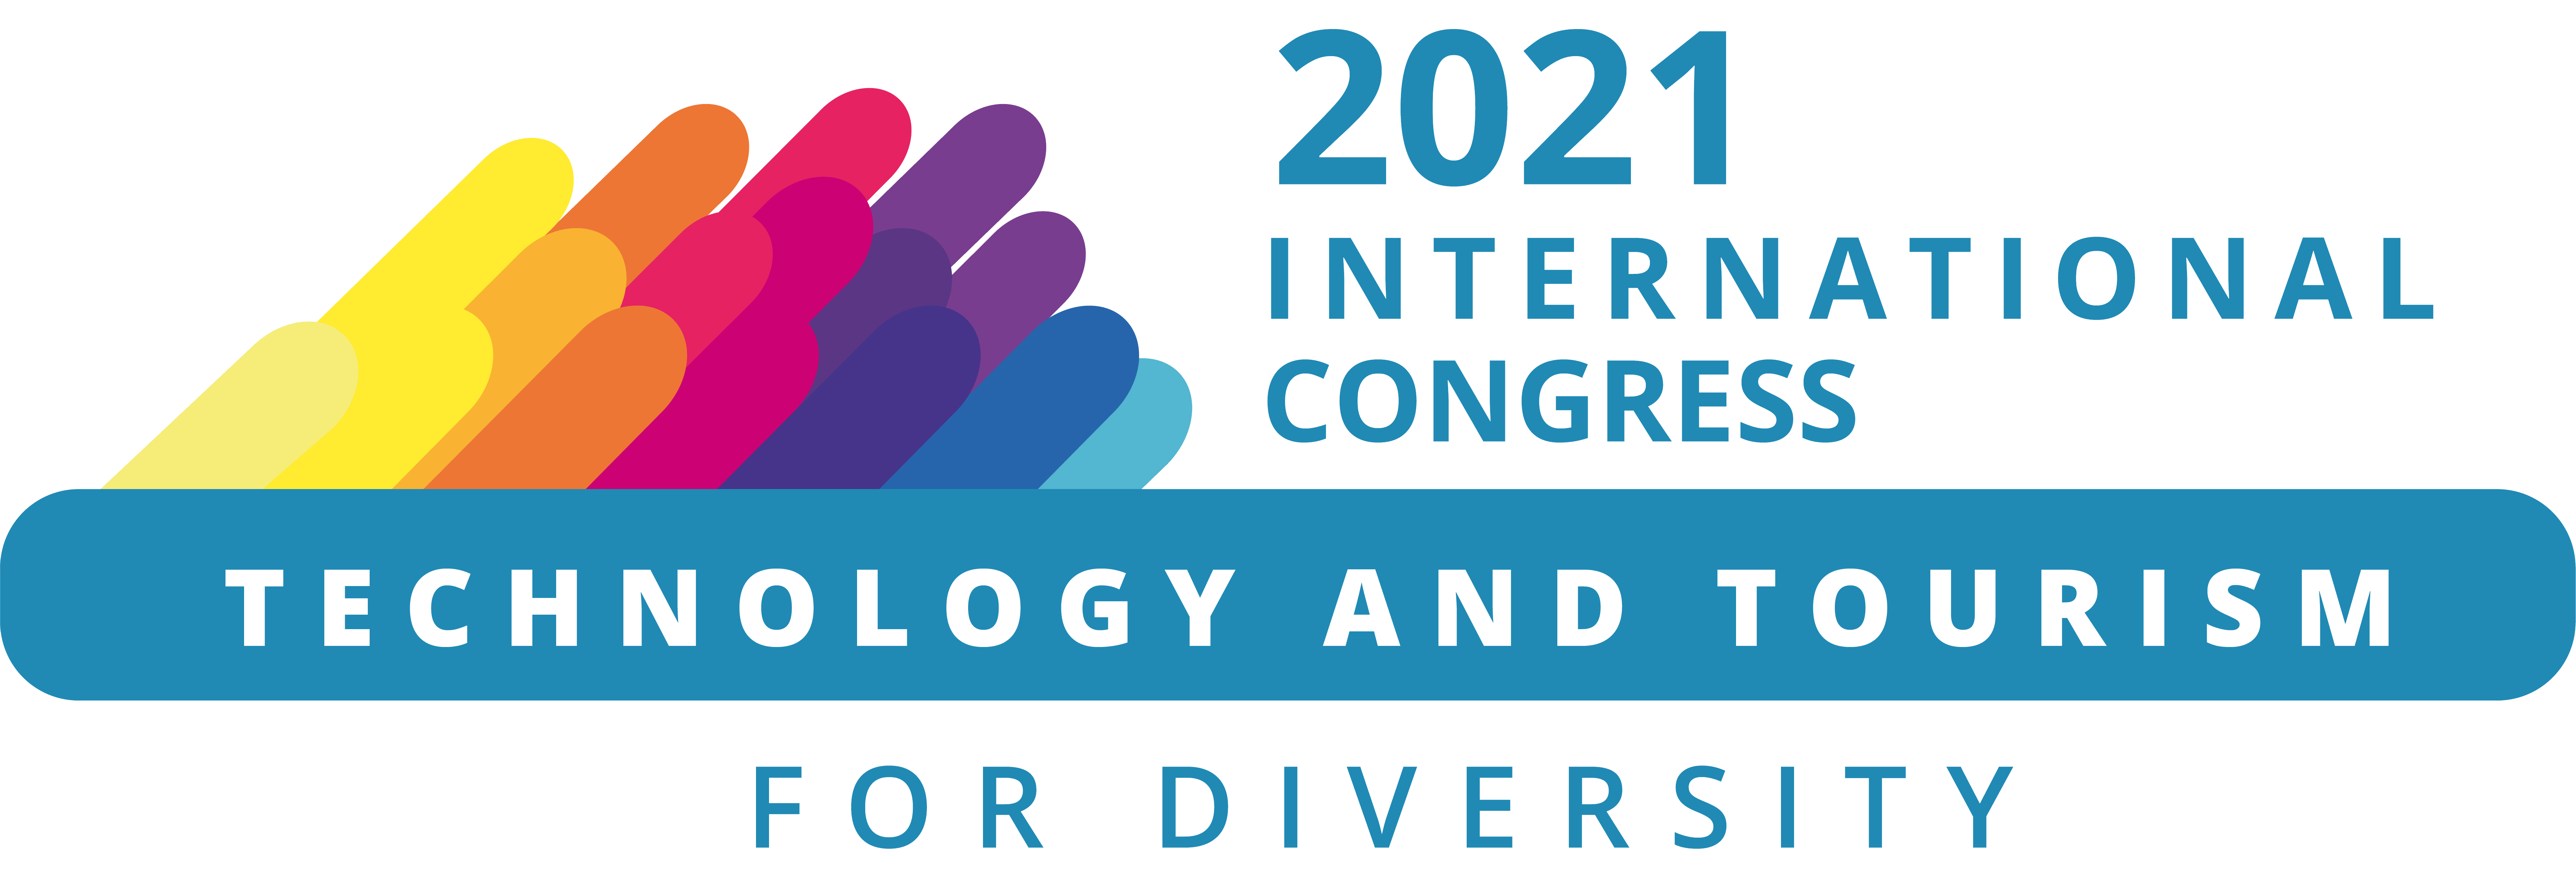 IV INTERNATIONAL CONGRESS ON TECHNOLOGY AND TOURISM FOR DIVERSITY